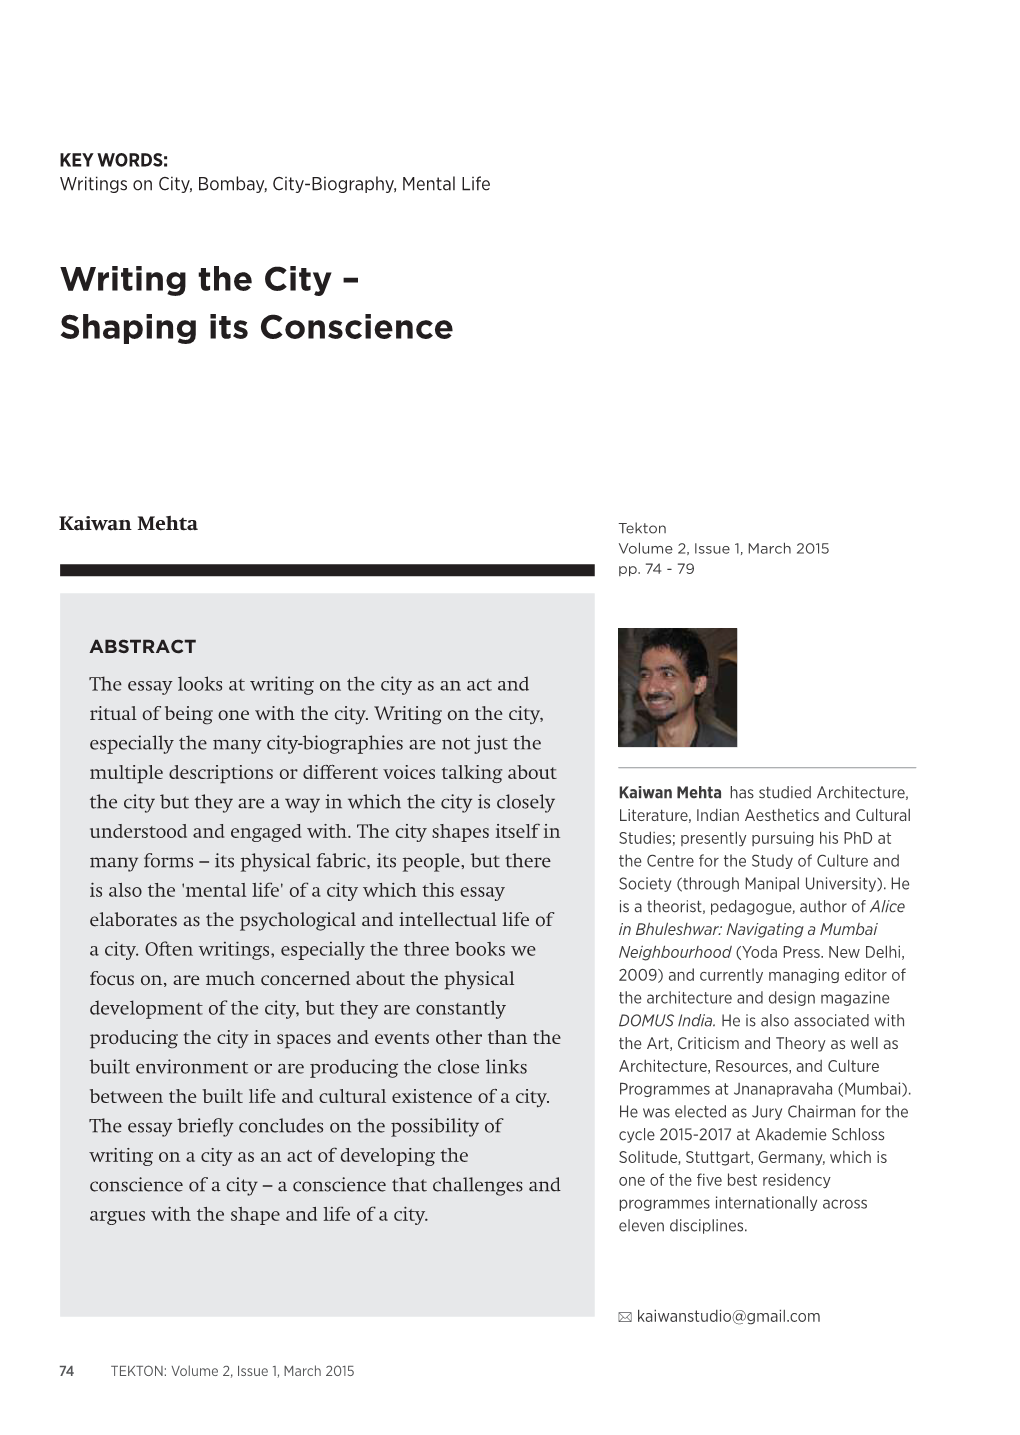 Writing the City – Shaping Its Conscience